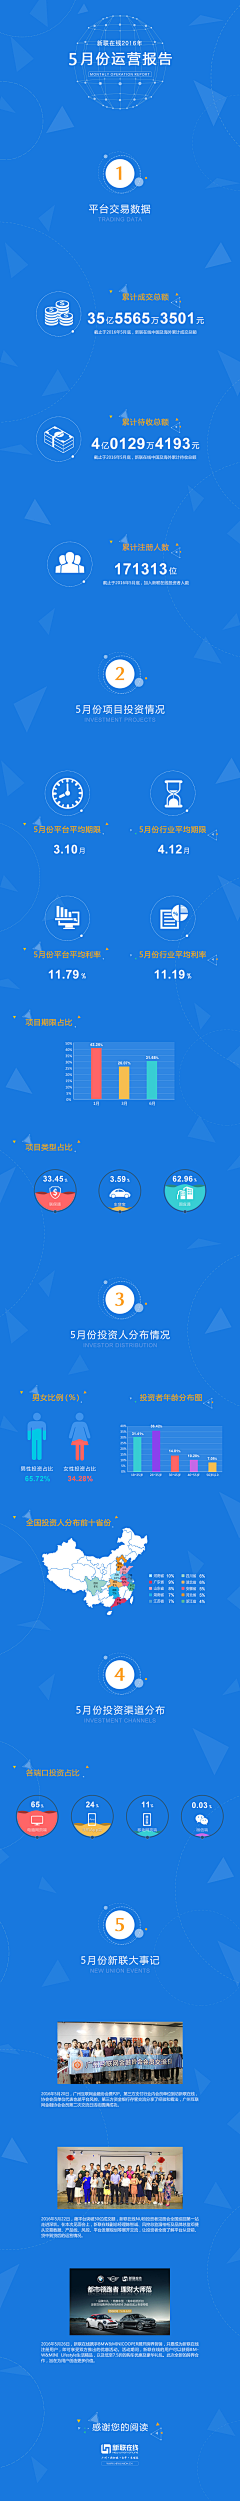 hexiaoweia采集到运营报告